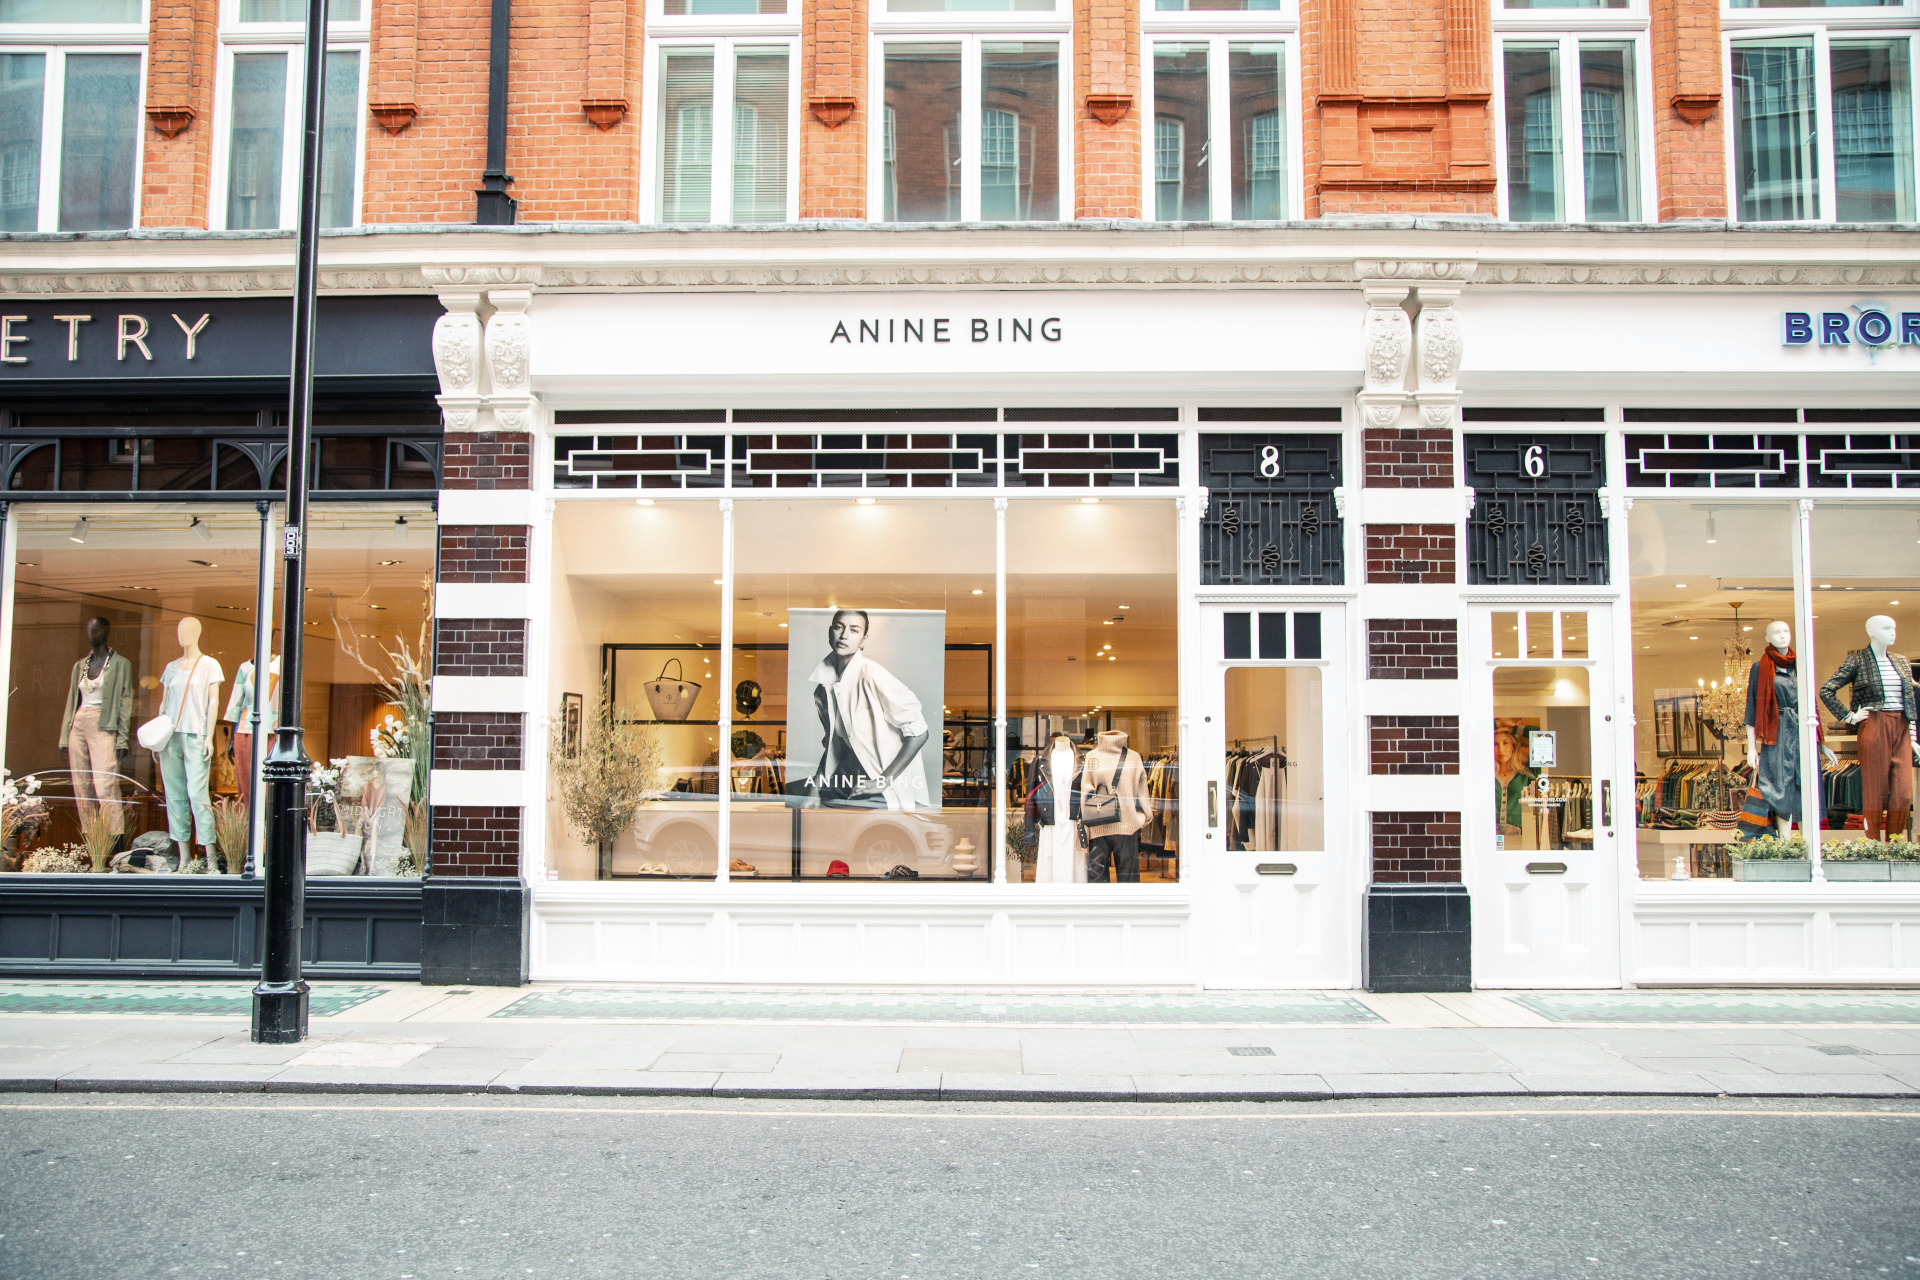 ANINE BING Chelsea store front